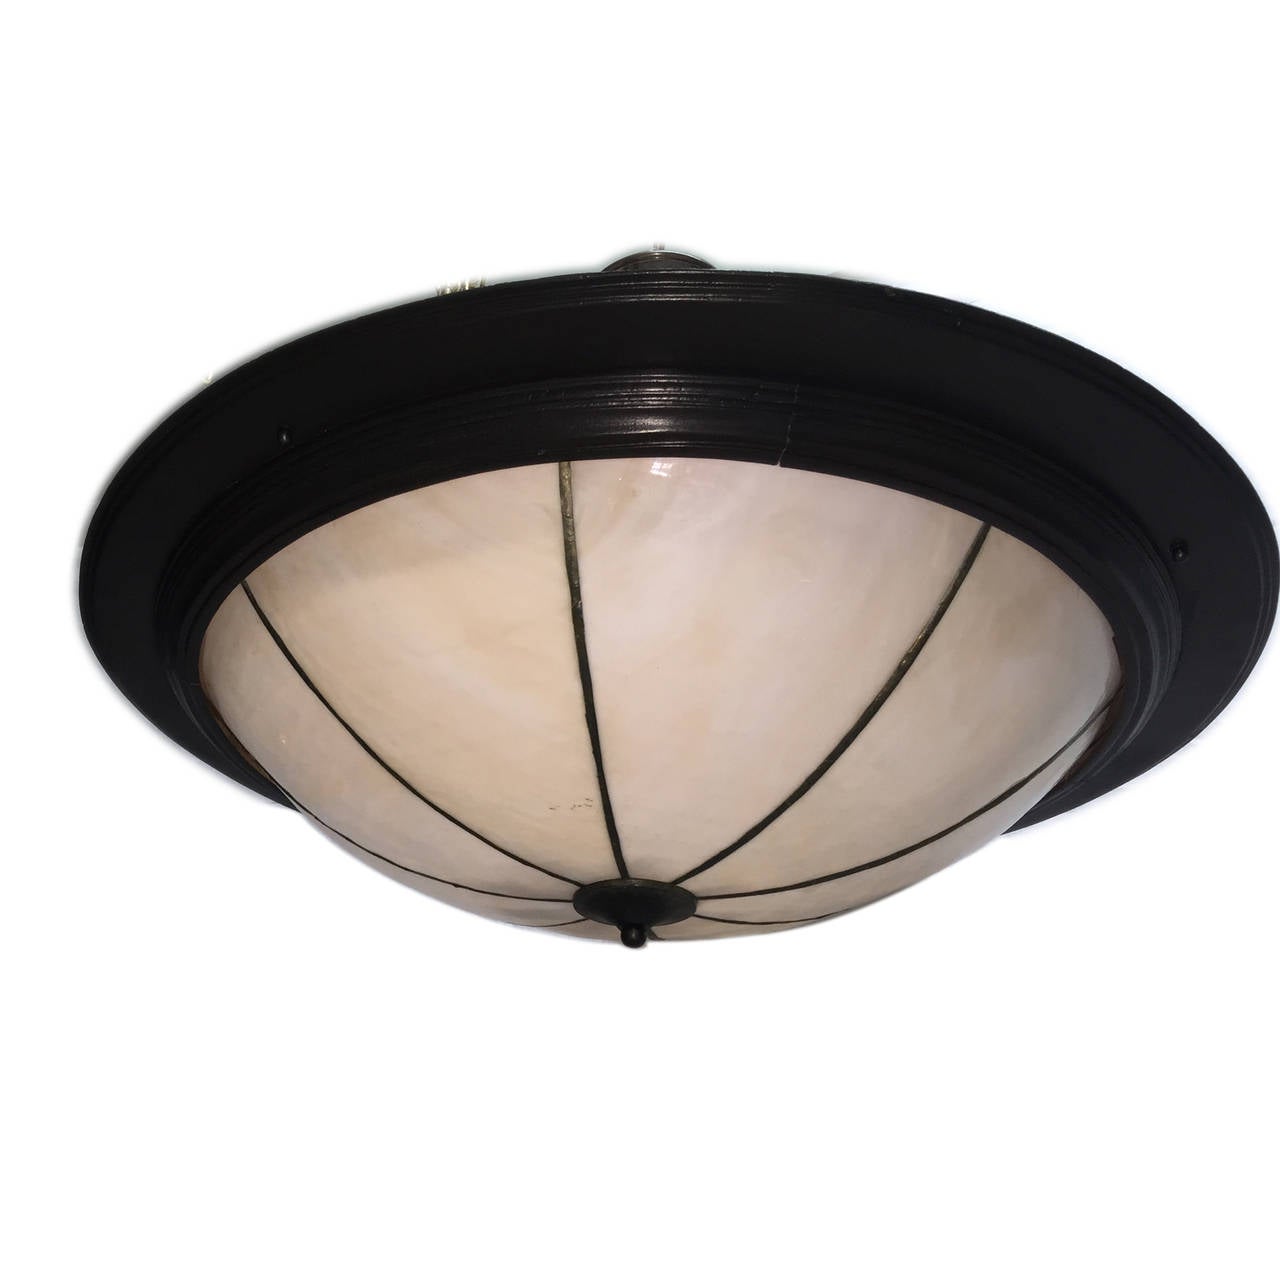 A circa 1940 English, leaded glass light fixture with interior lights and with wooden frame.
Measurements:
33.5